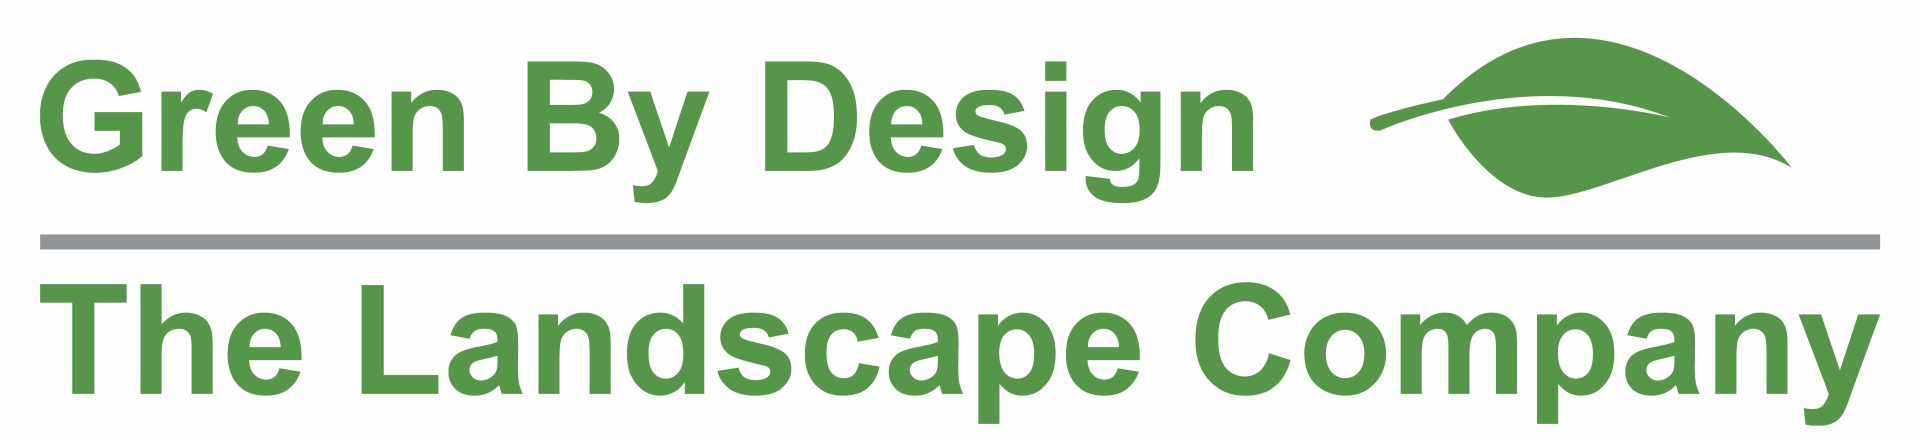 Green By Design, LLC_The Landscape Company